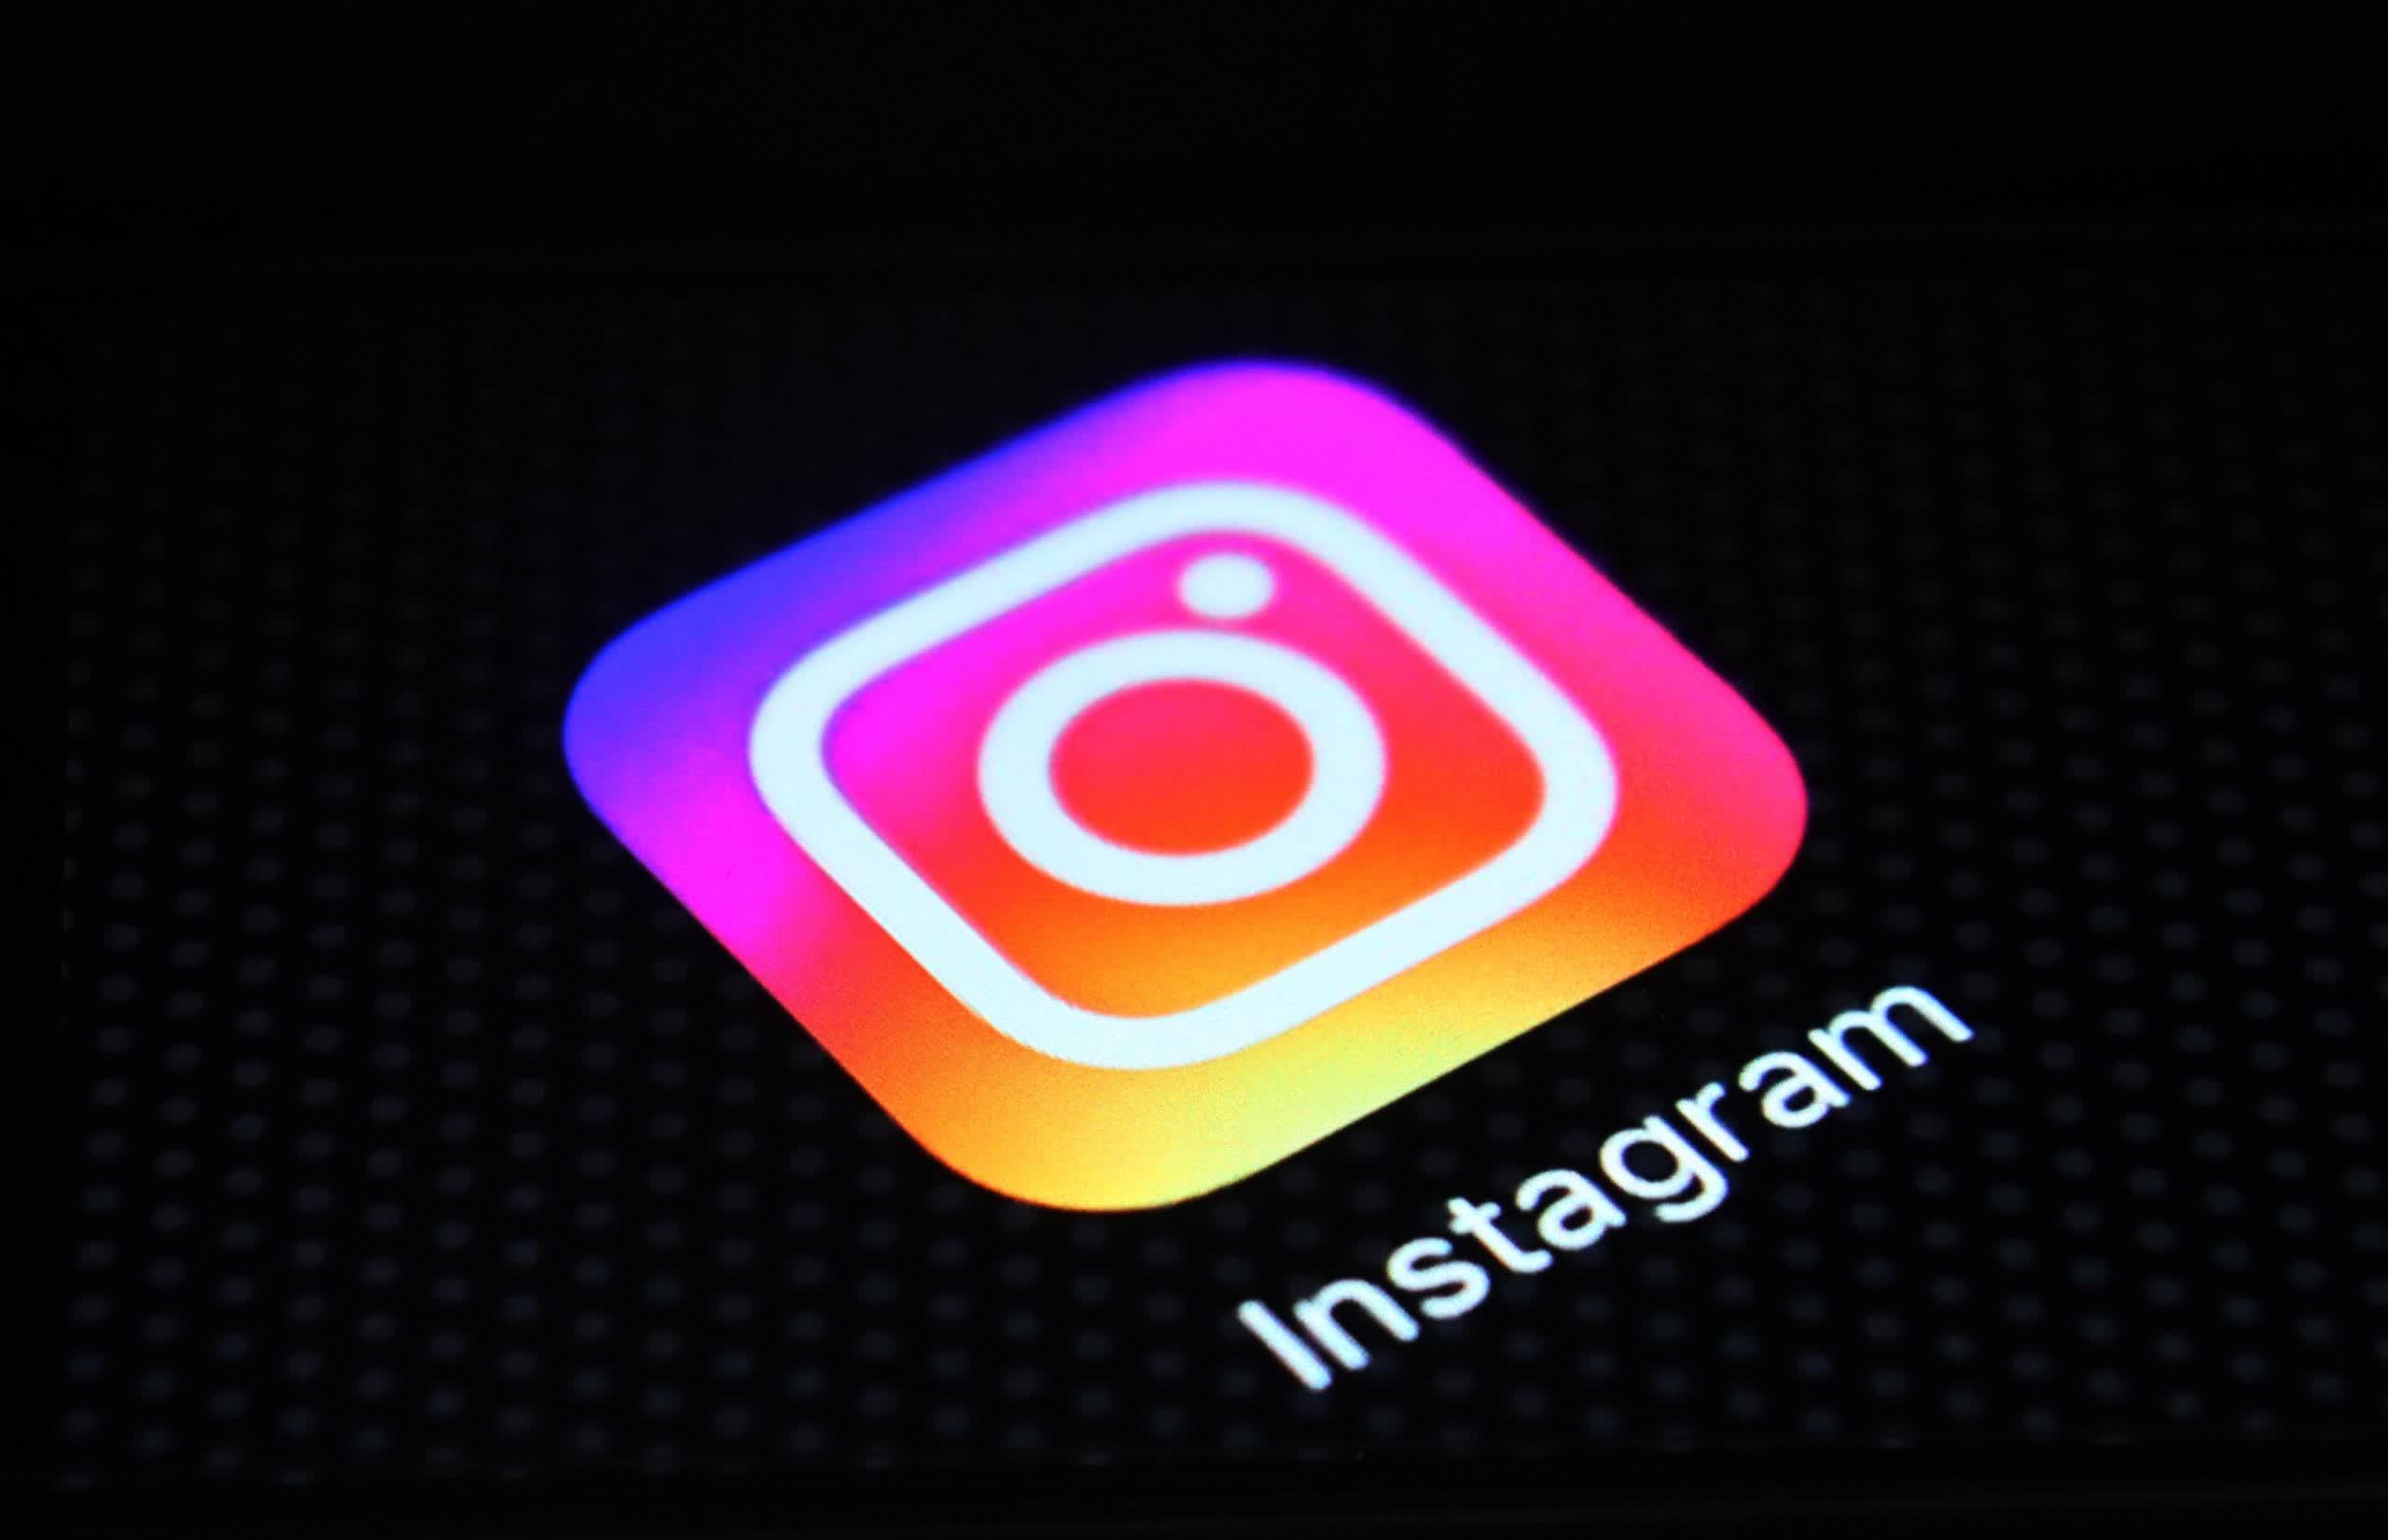 Instagram’s unskippable ads test causes outrage among users – The TechLead